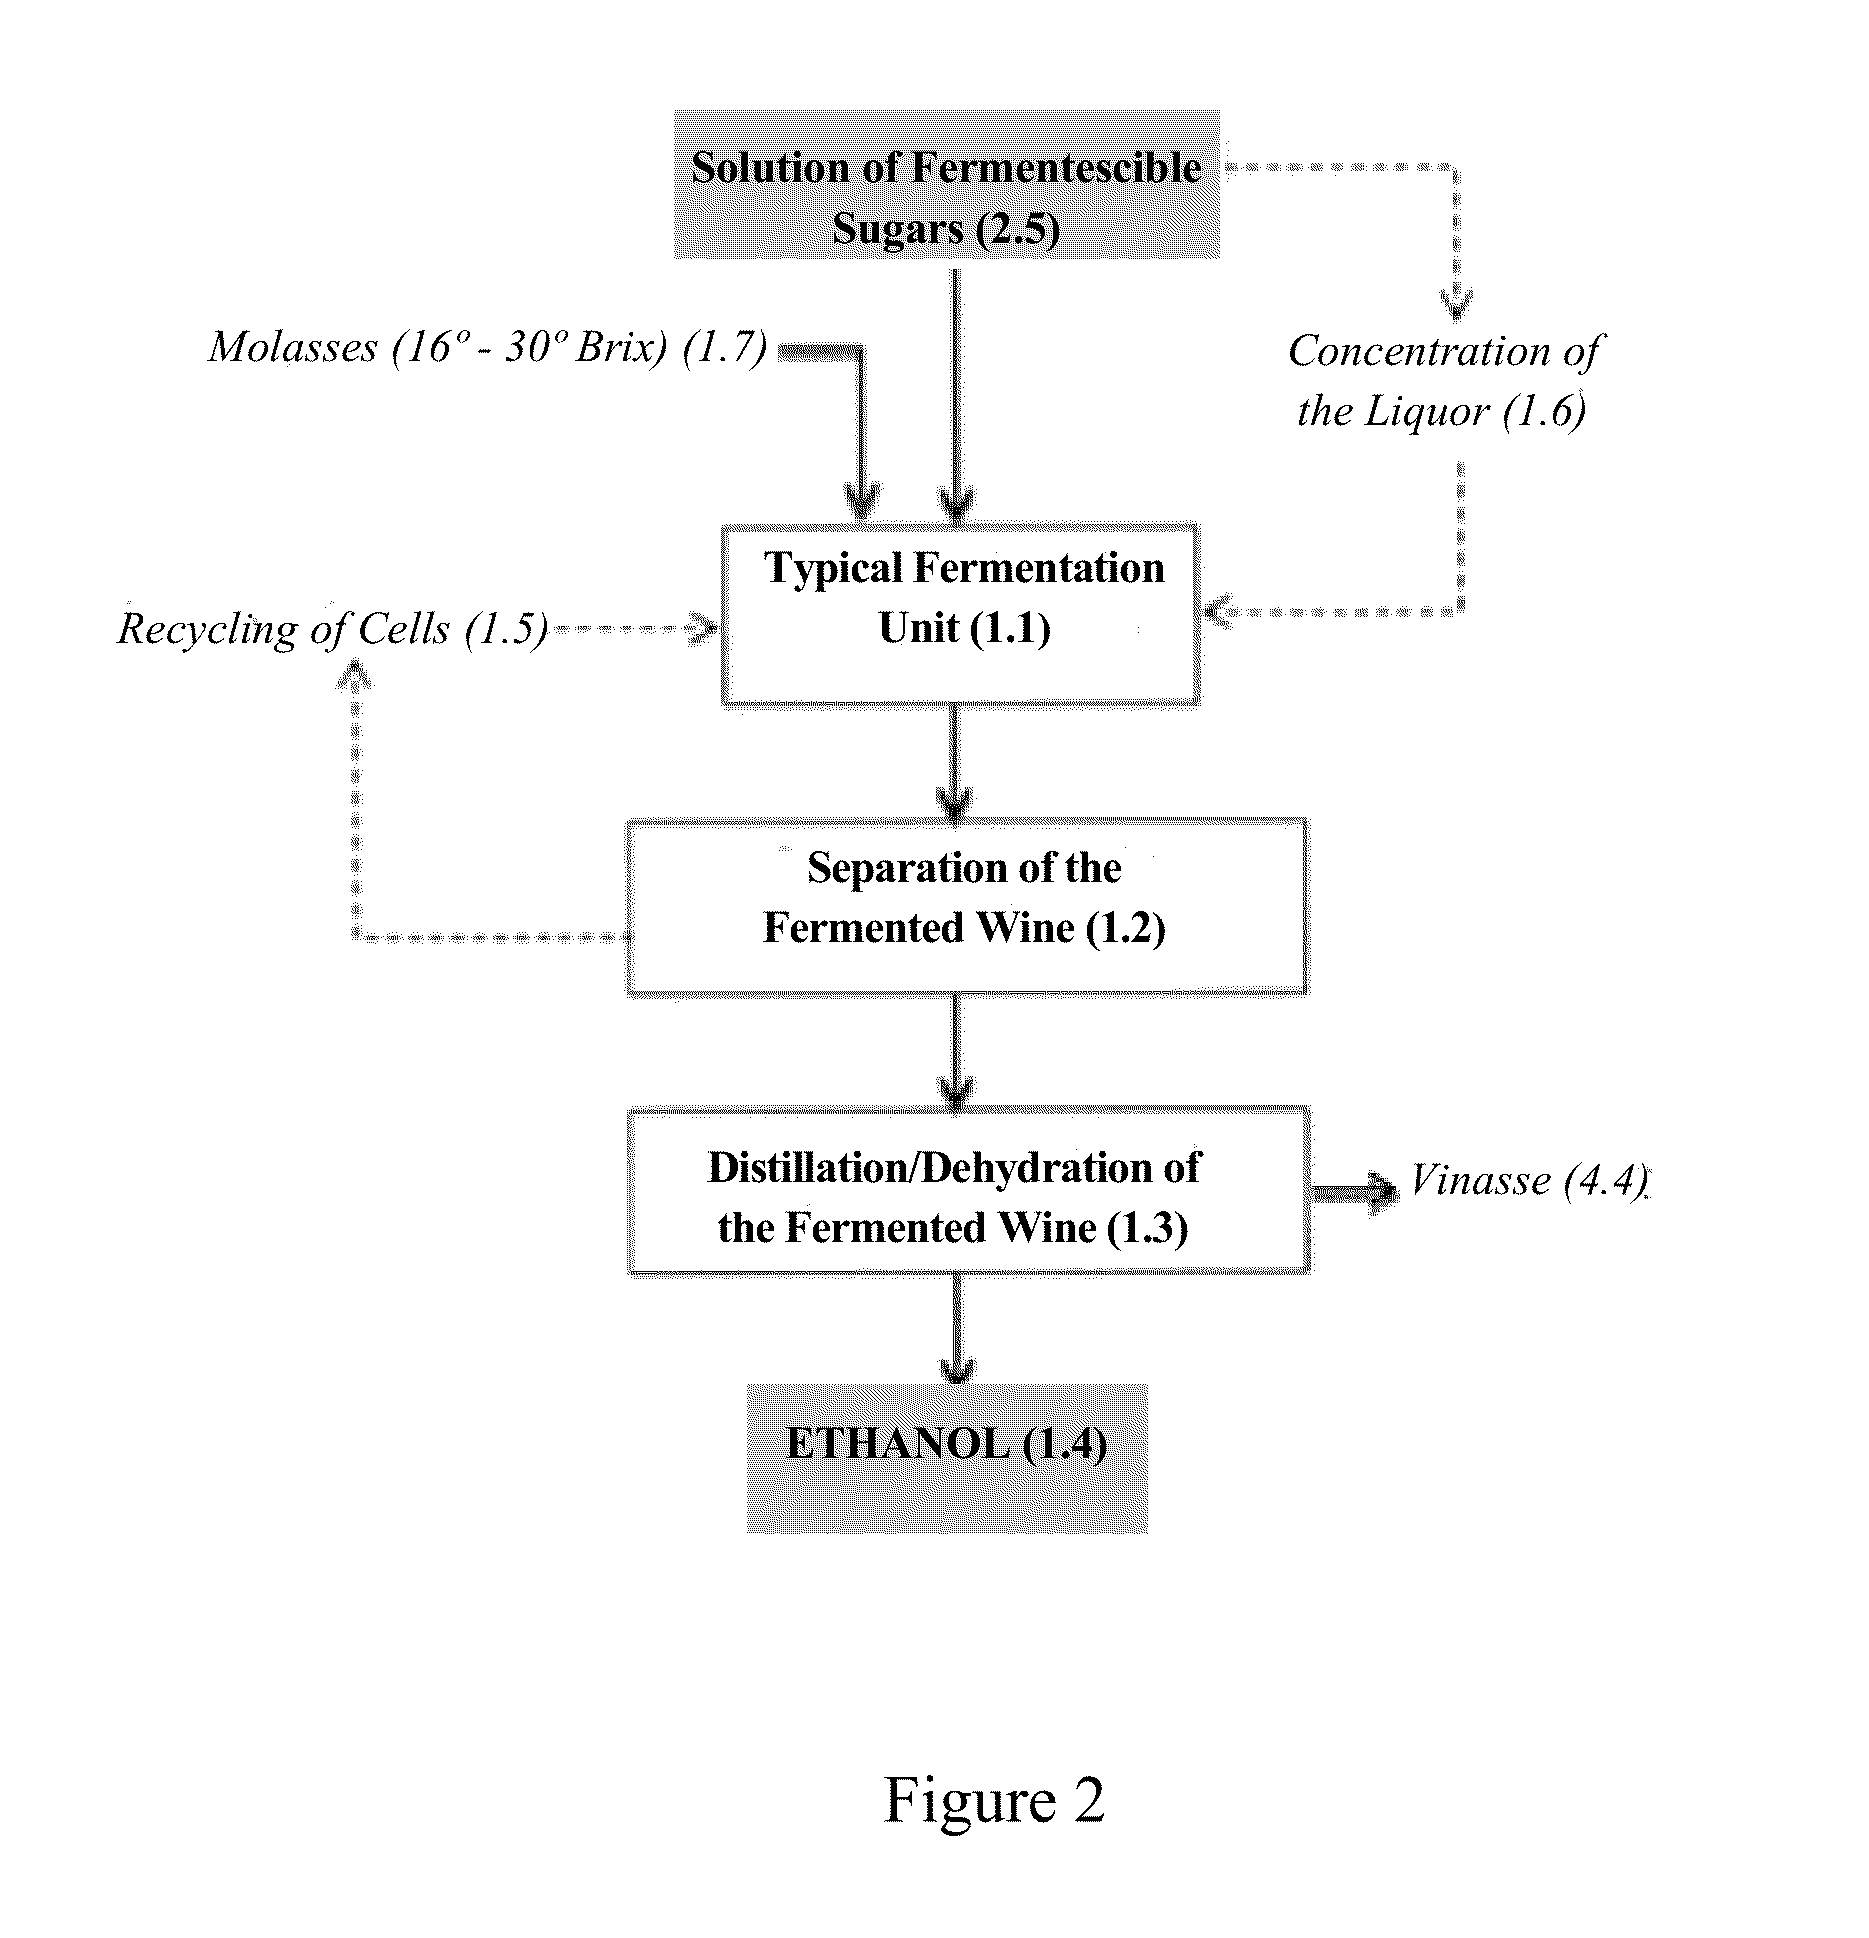 System and method for the integrated production of first and second generation ethanol and the use of integration points for such production